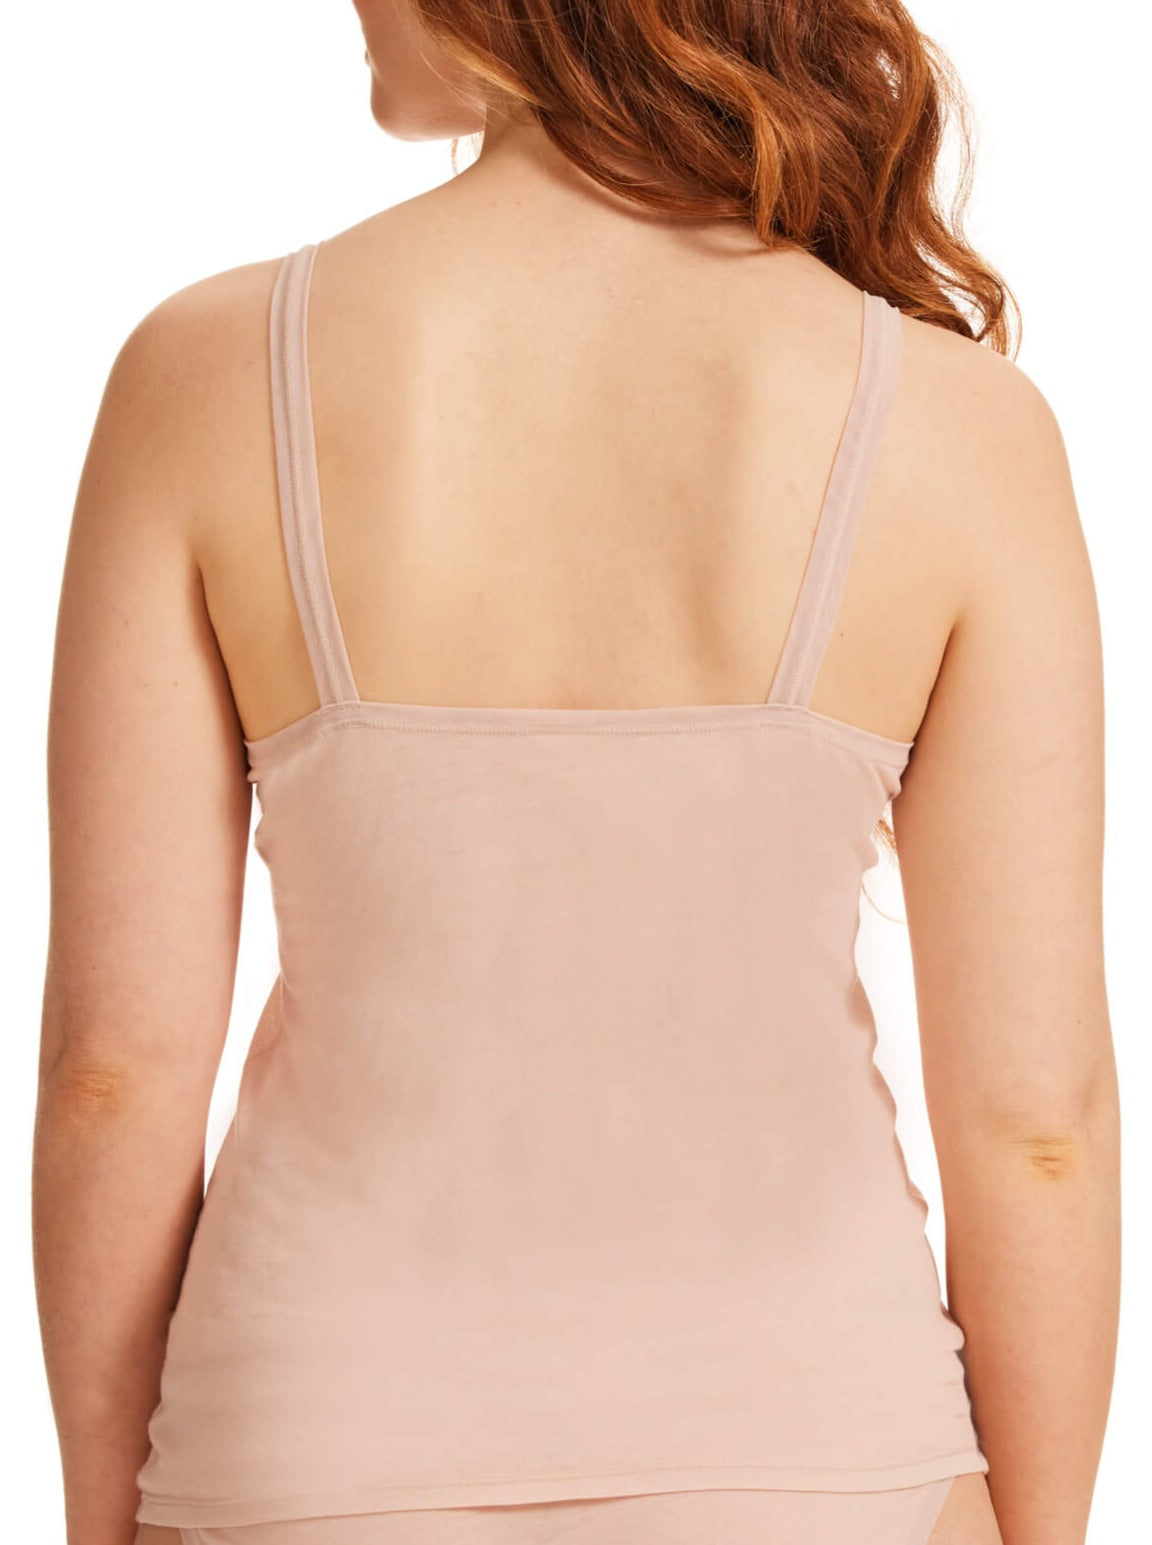 Pure Cotton Cami in Honey Beige - Kayser Lingerie